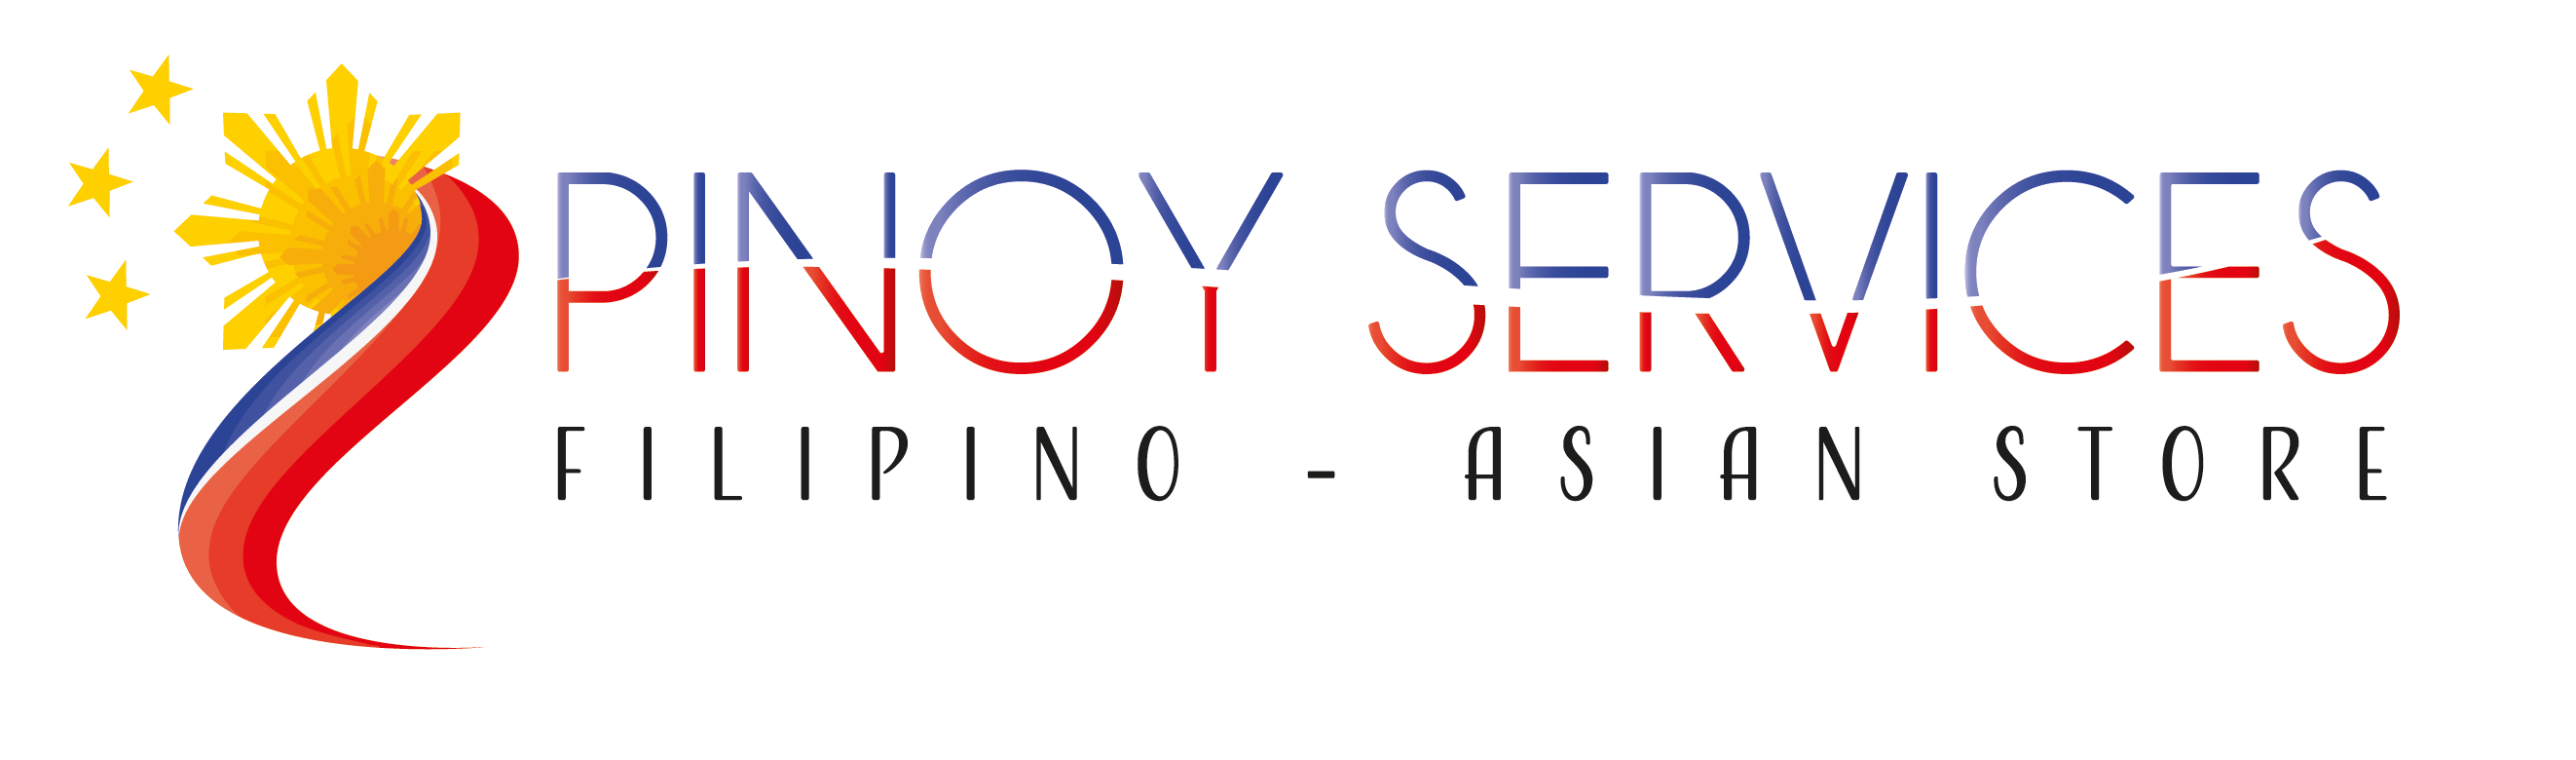 Pinoy Services banner